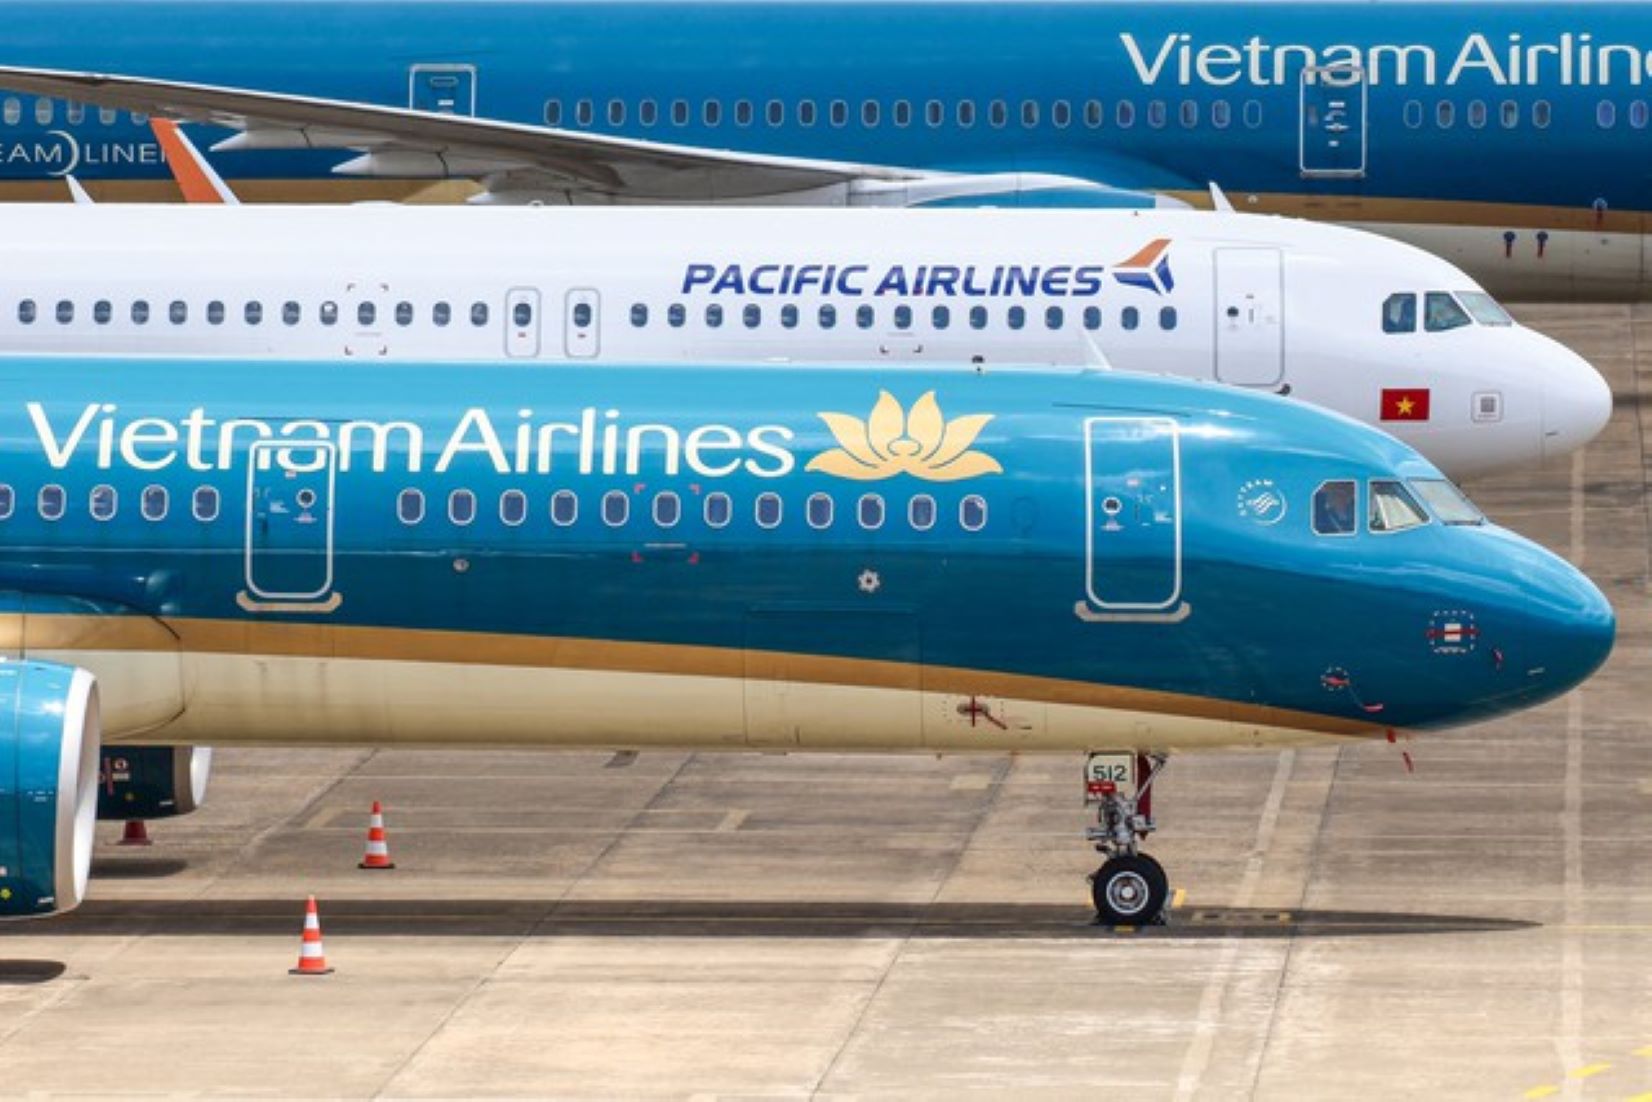 Vietnamese Air Carriers Asked To Develop Plans To Make Up For Jet Shortage